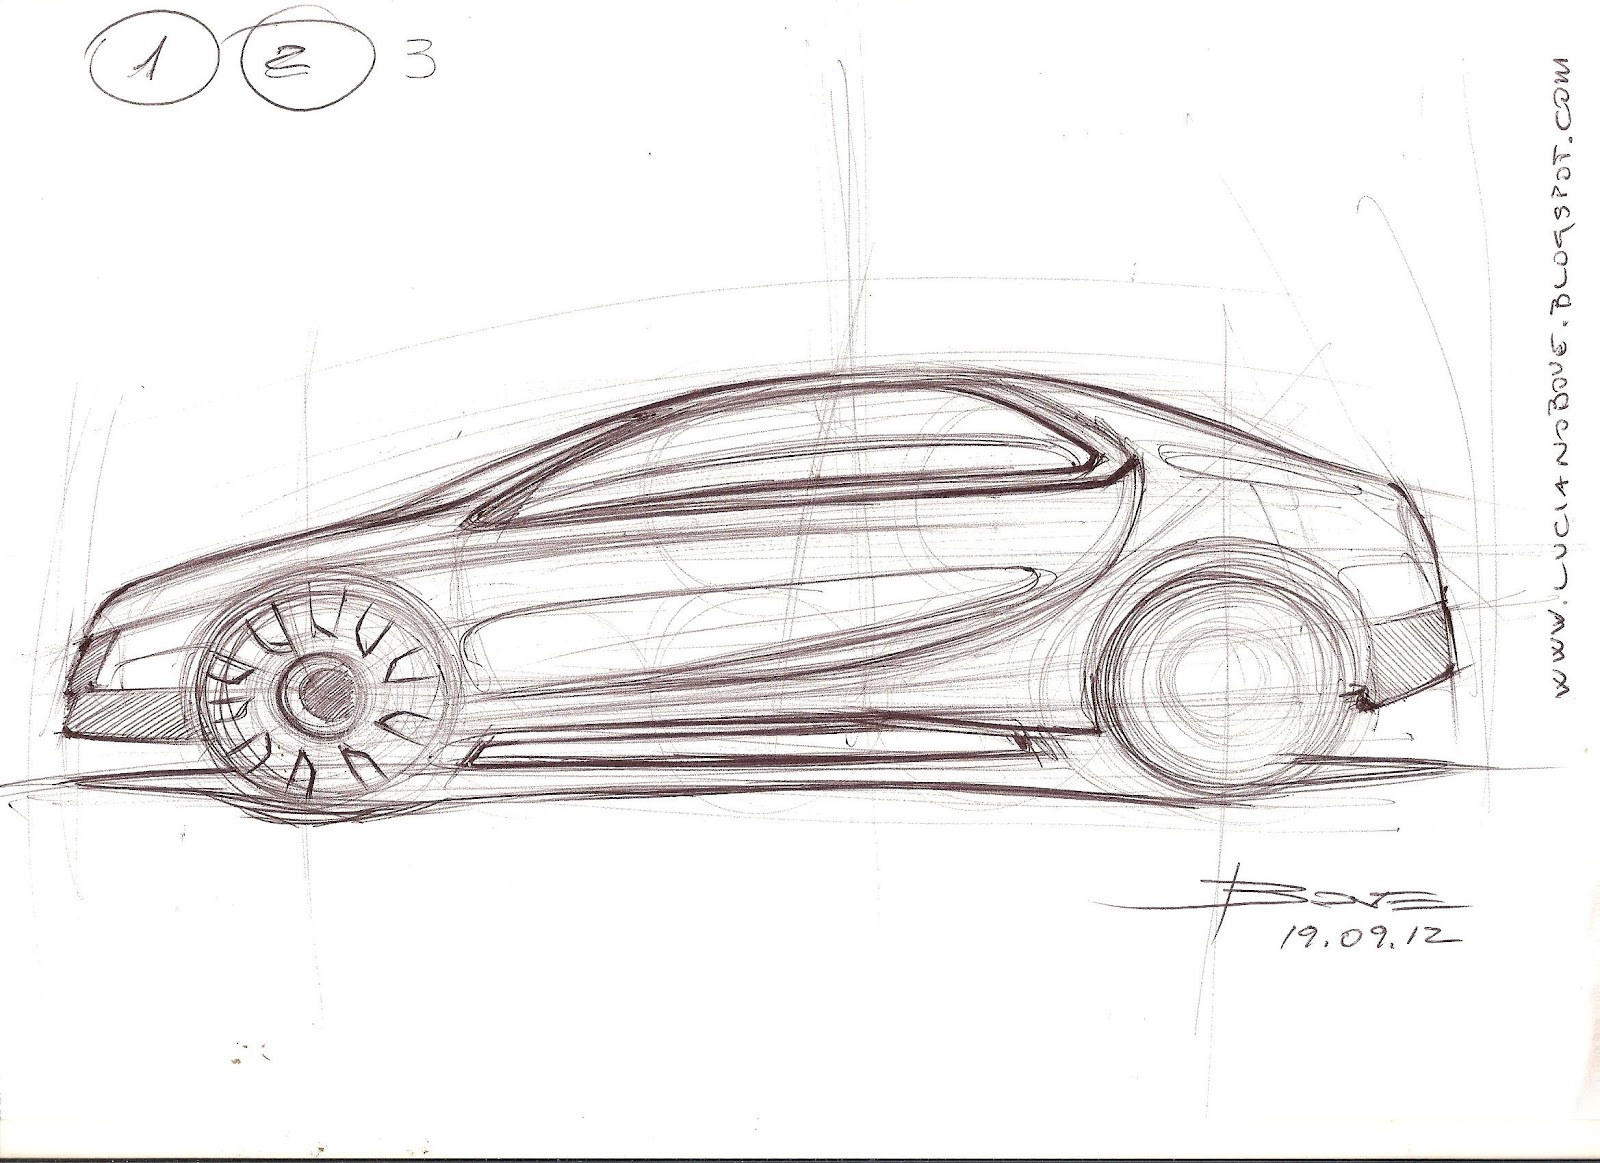 Car sketch tutorial the side view by Luciano Bove – lucianobove.com